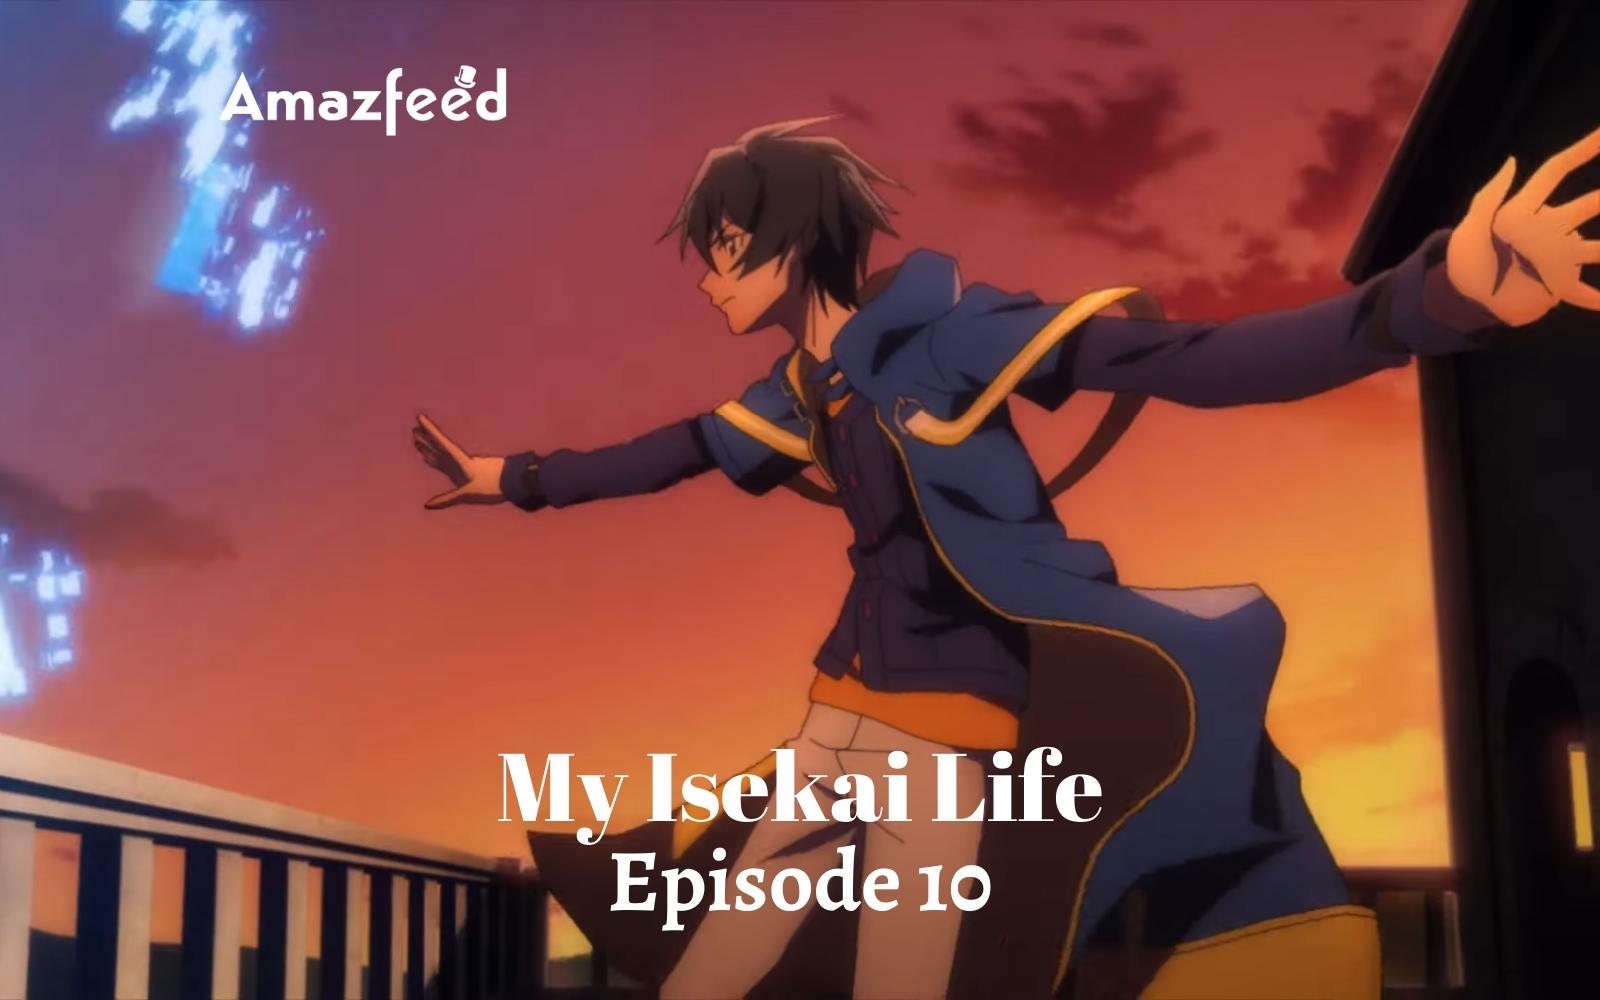 My Isekai Life Episode 10 : Countdown, Release Date, Spoiler, Premiere Time, Where to Watch, Recap & Cast